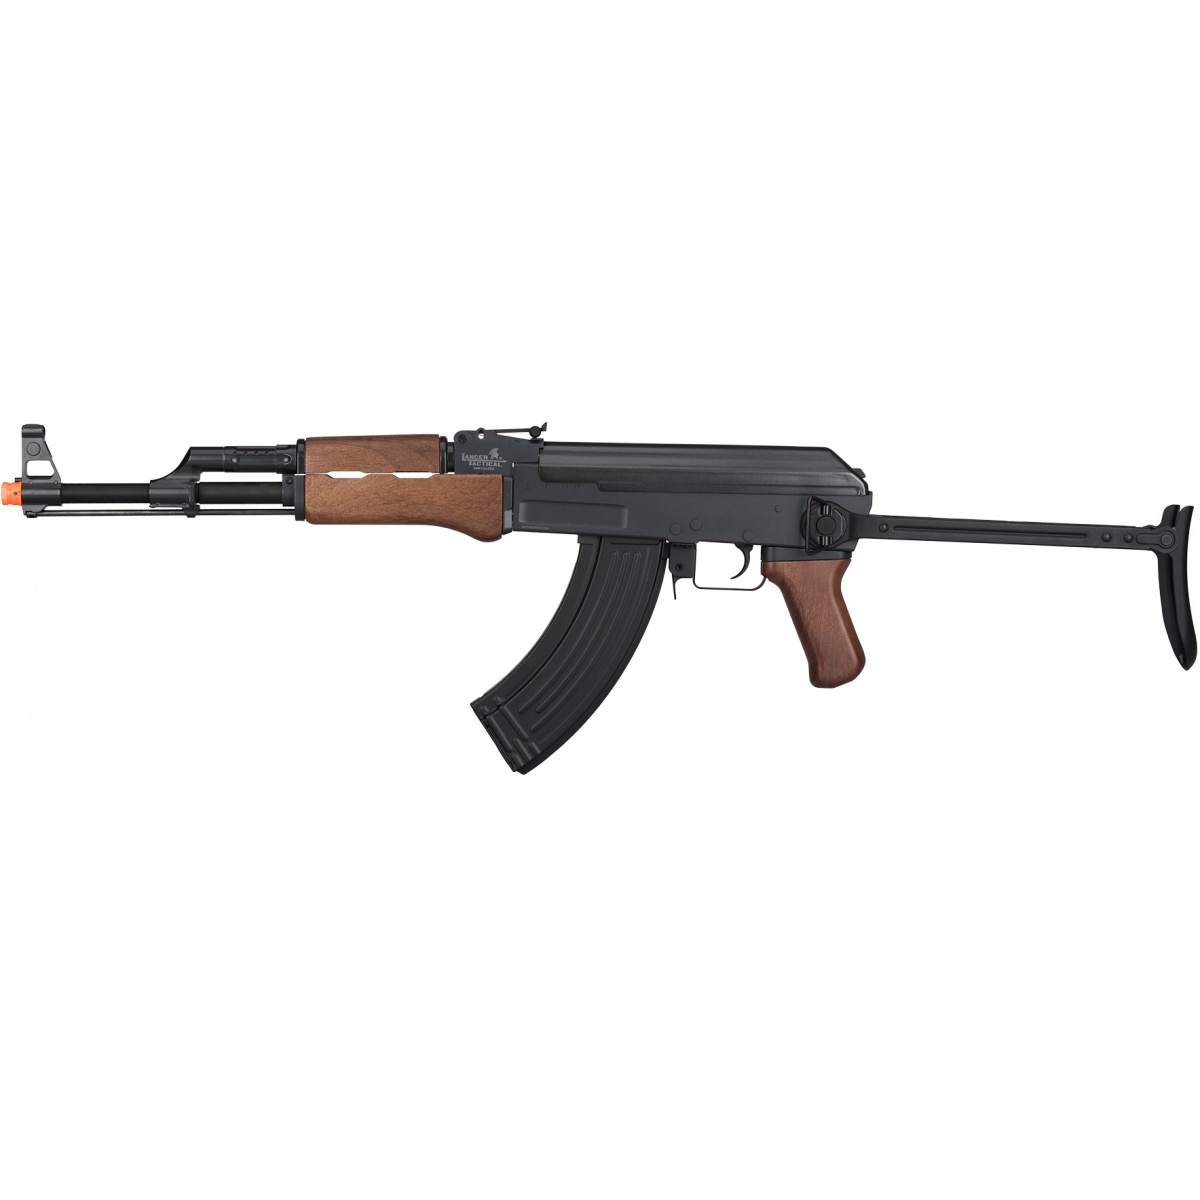  Lancer Tactical Gen 2 Airsoft Full Metal AK-47 Airsoft  LT-728-G2 AEG Rifle with Battery & Charger 400 FPS-Wood : Sports & Outdoors